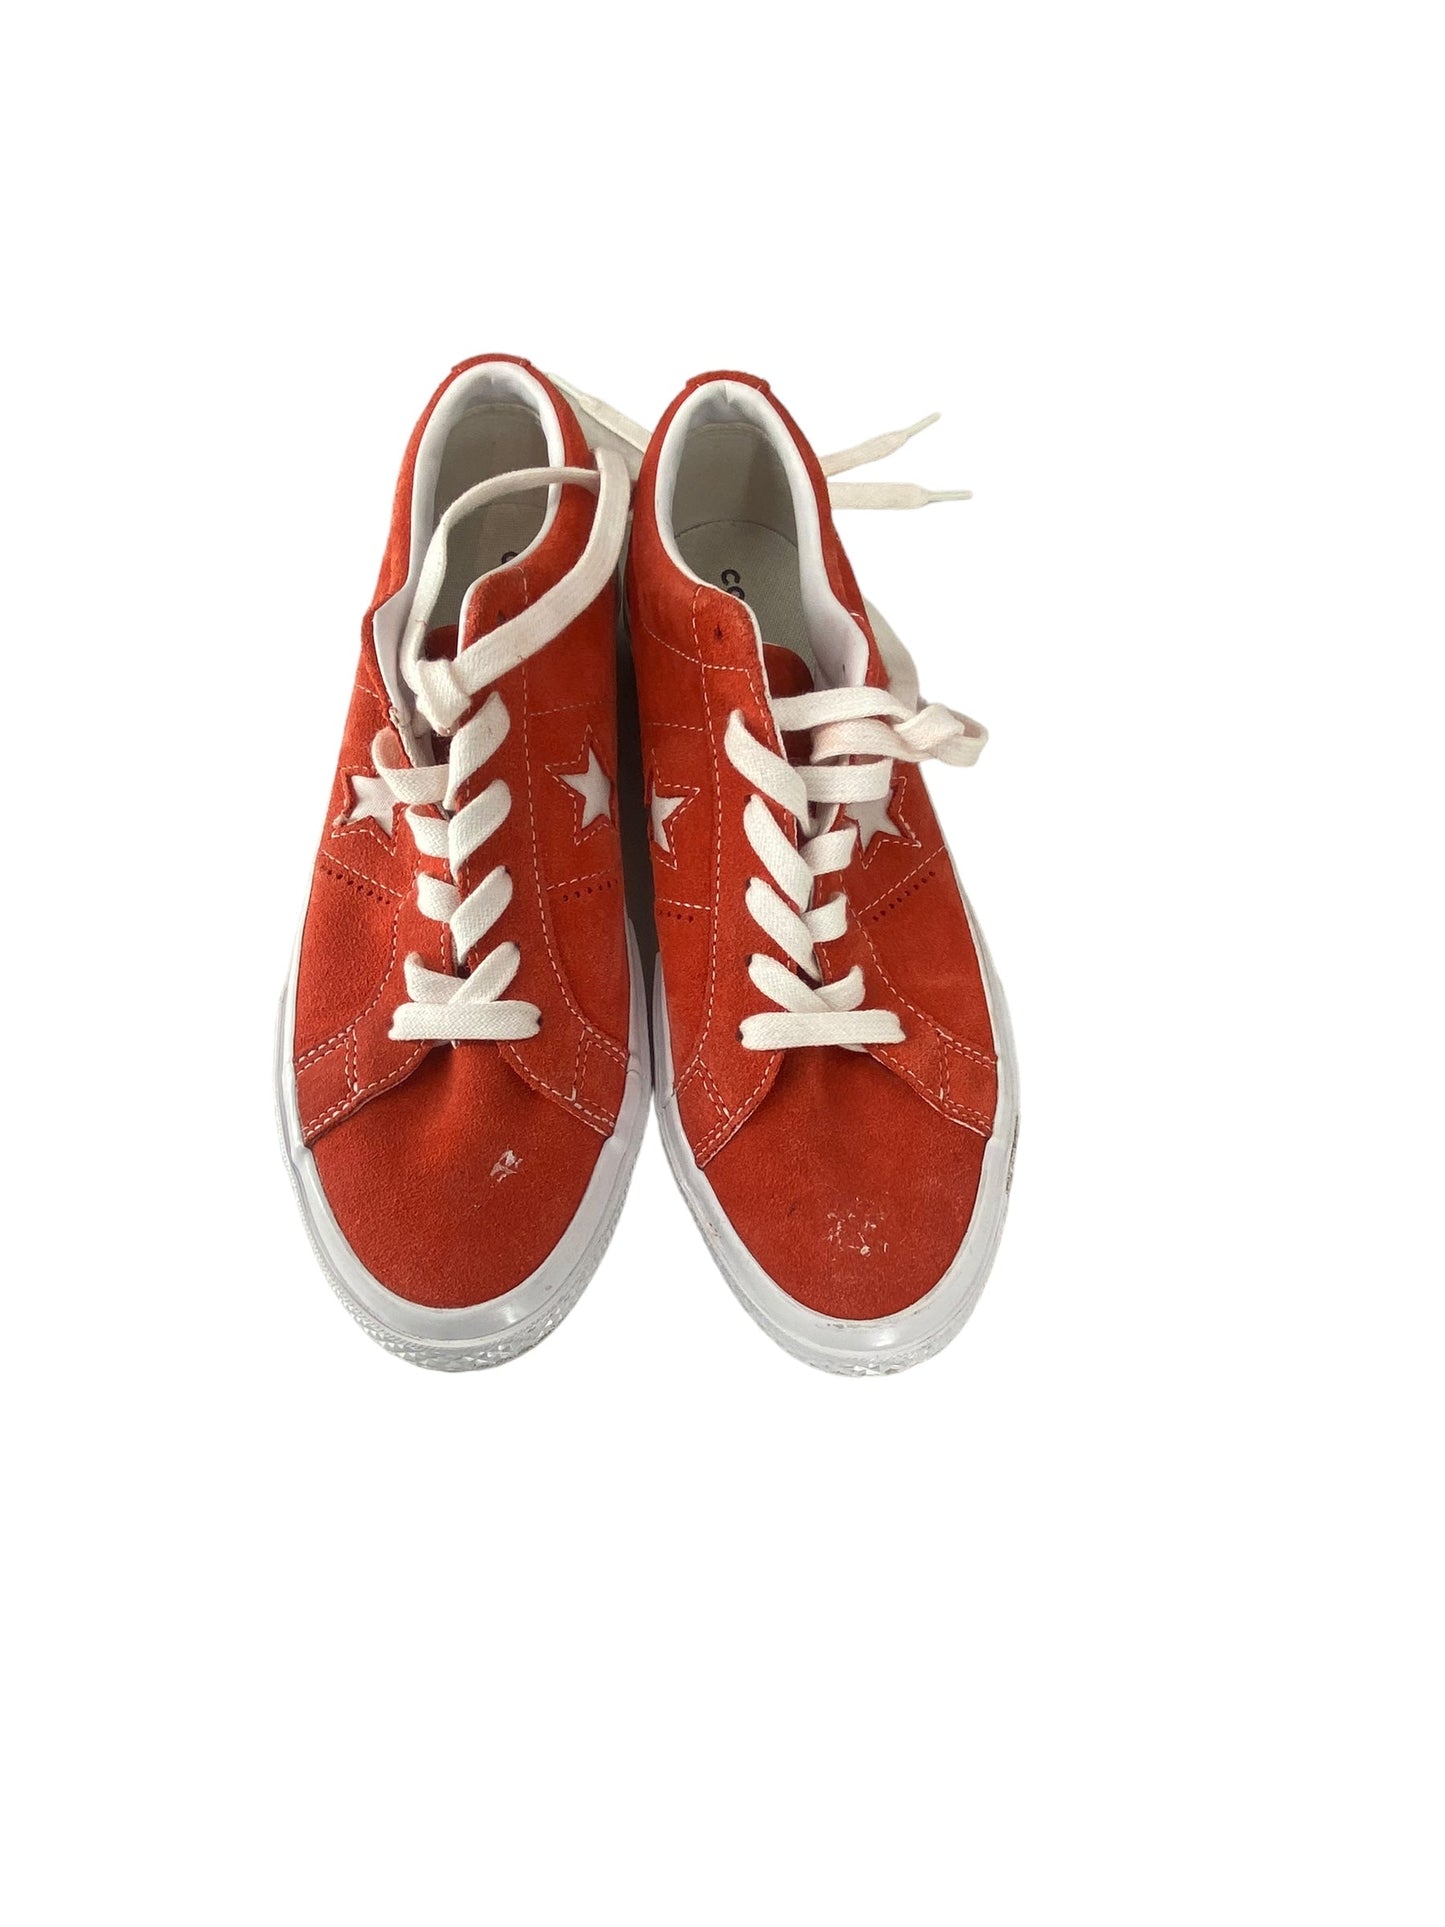 Red Shoes Sneakers Converse, Size 6.5